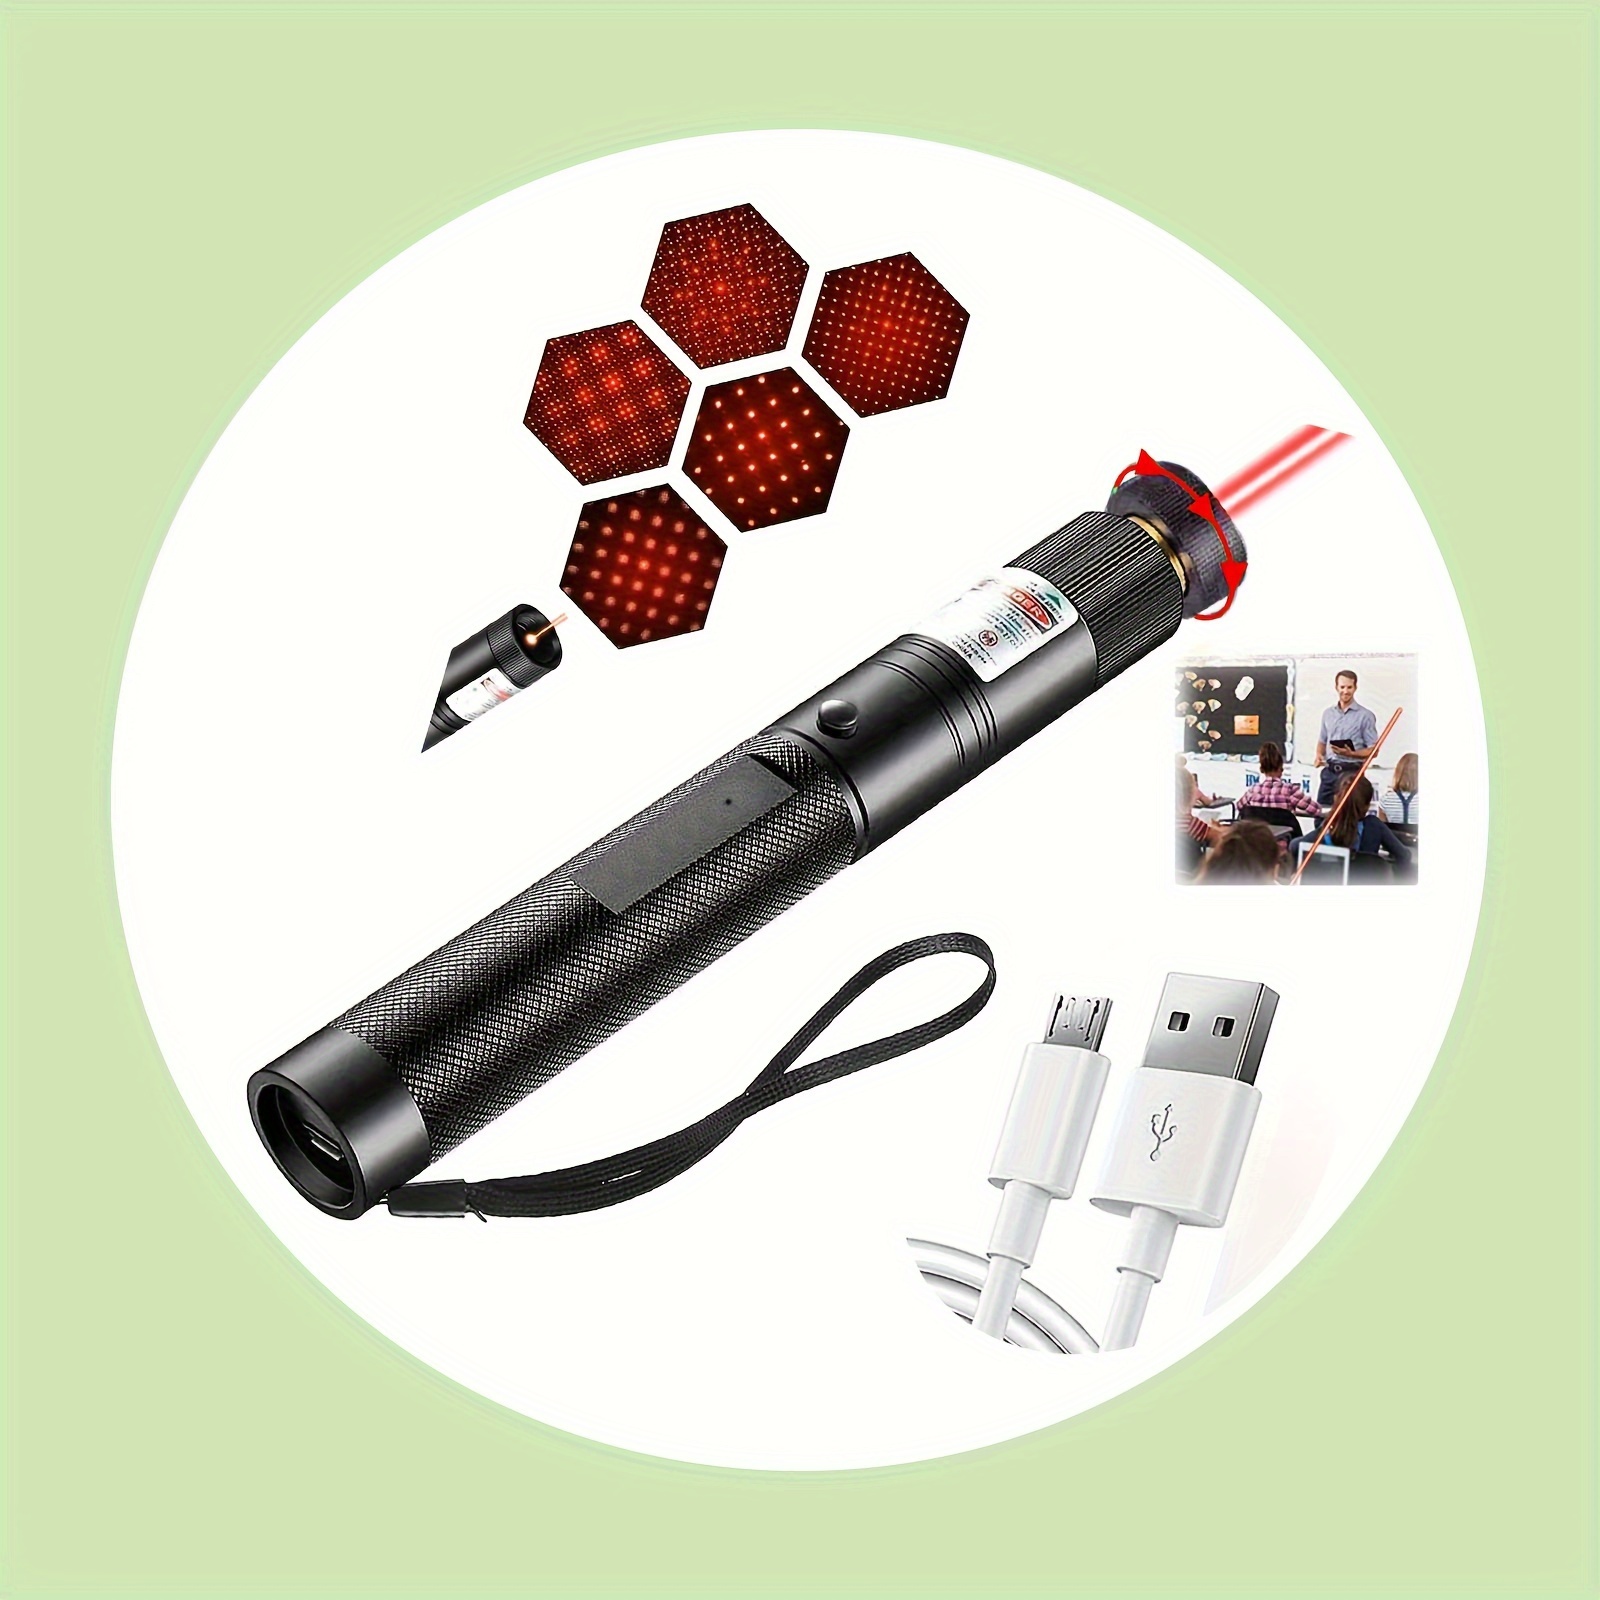 Red Laser Pointer High Power, High Long Range Strong Laser Light Pointer  for Cats Dogs Toy Rechargeable High Power Laser Pointer for Presentations